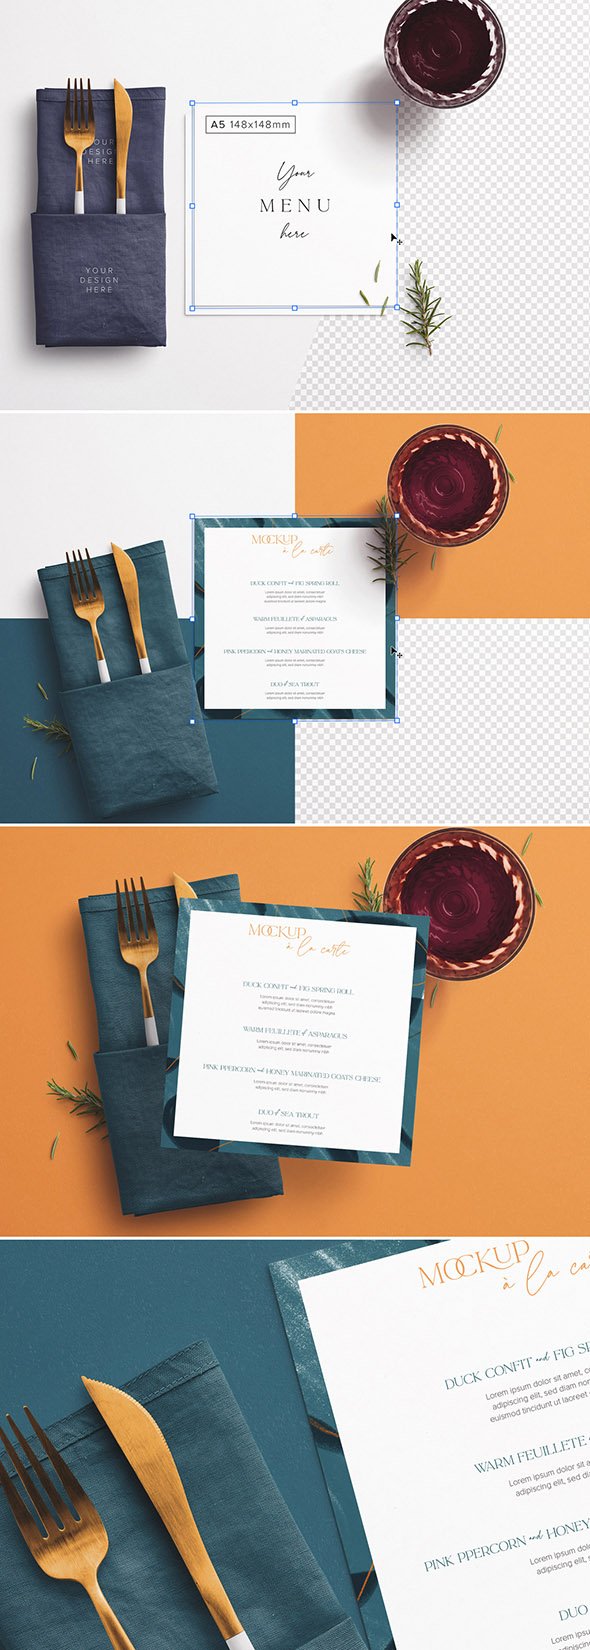 Adobestock - Table Small Square Menu with Cutleries, Napkin, Drink, and Herbs - 391585525